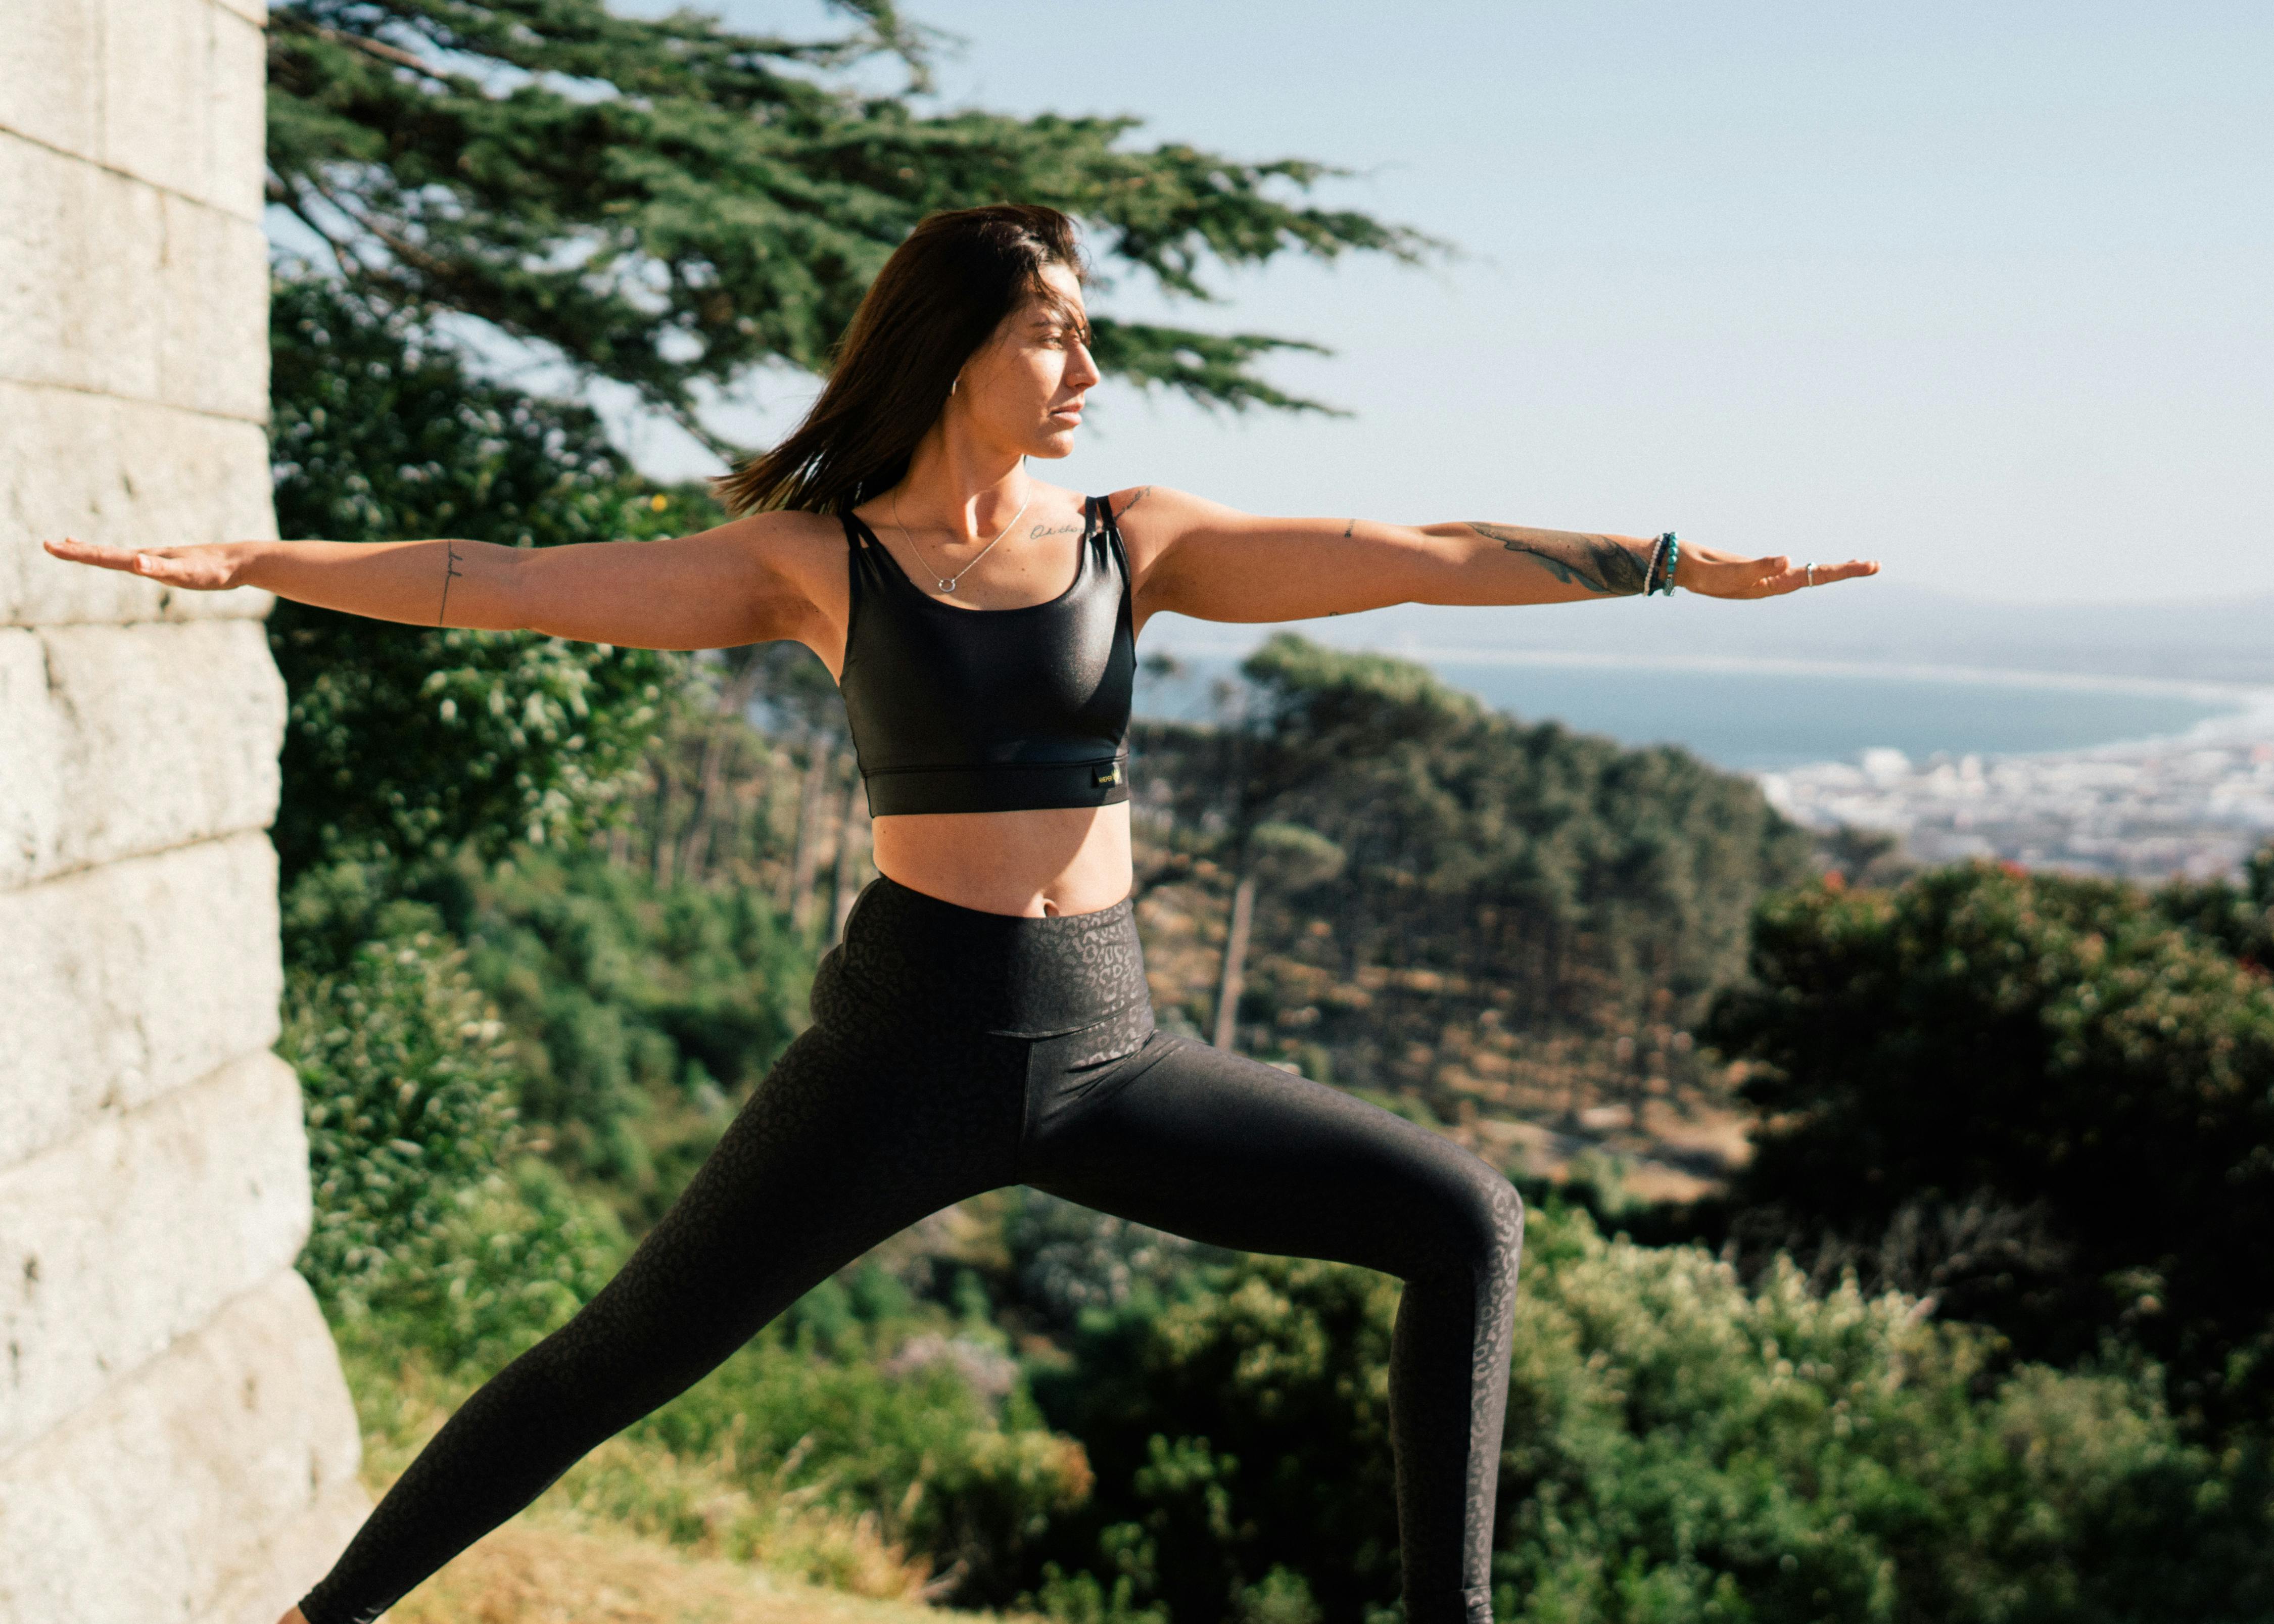 350+ Black Yoga Pants Stock Videos and Royalty-Free Footage - iStock